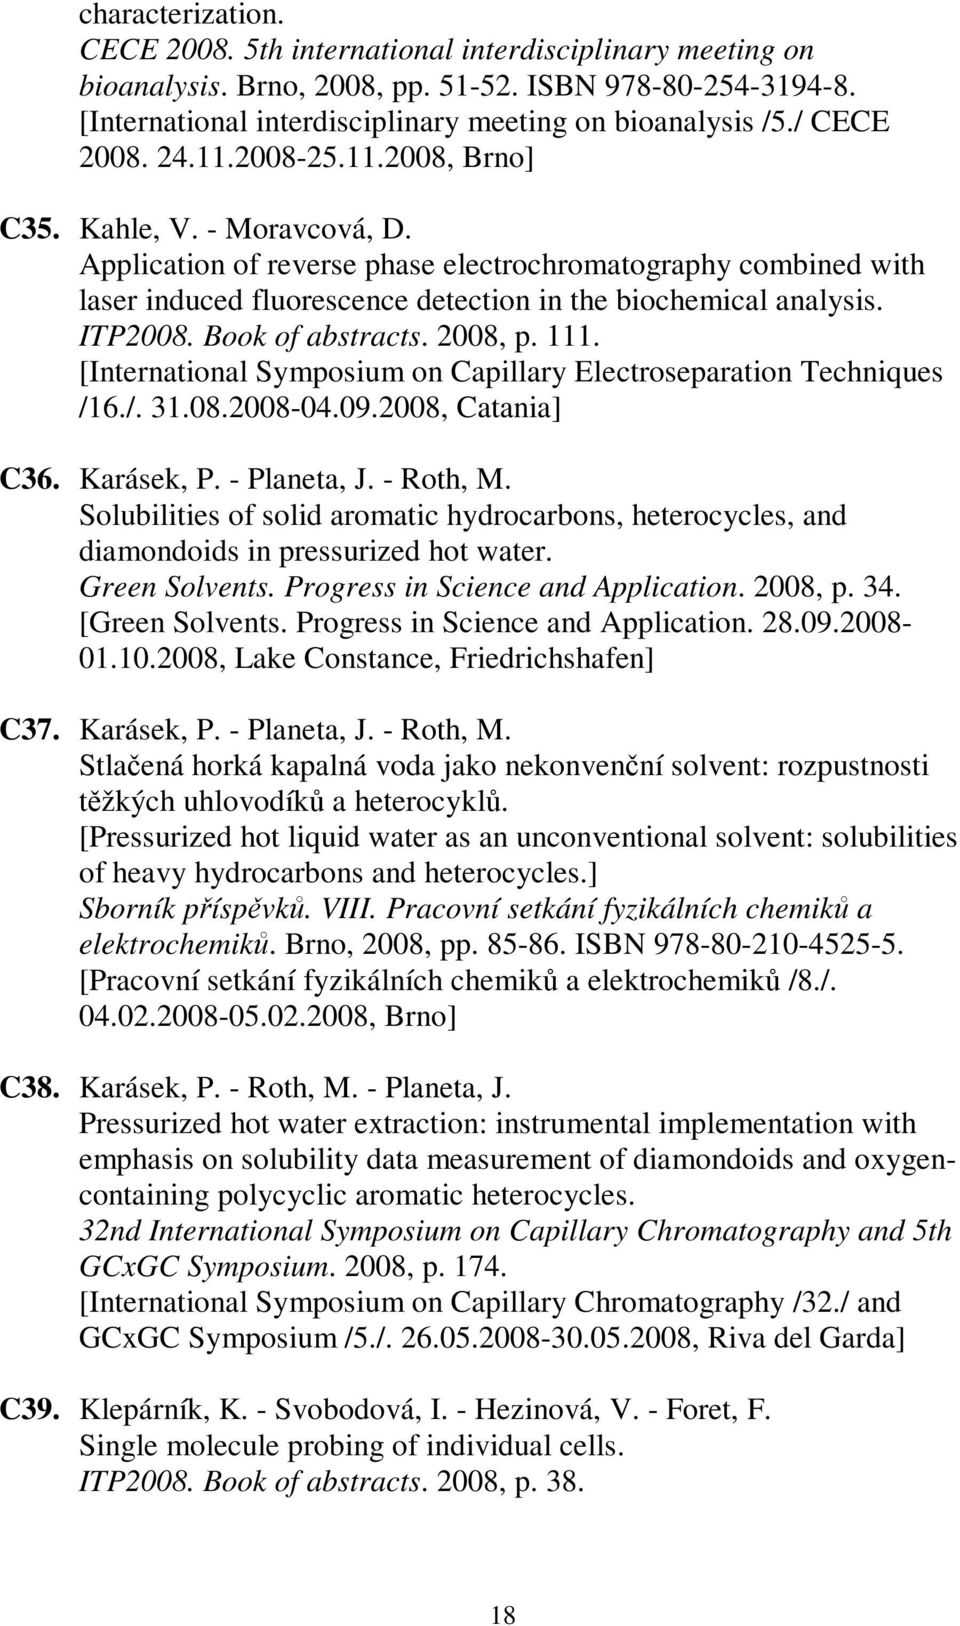 Application of reverse phase electrochromatography combined with laser induced fluorescence detection in the biochemical analysis. ITP2008. Book of abstracts. 2008, p. 111.